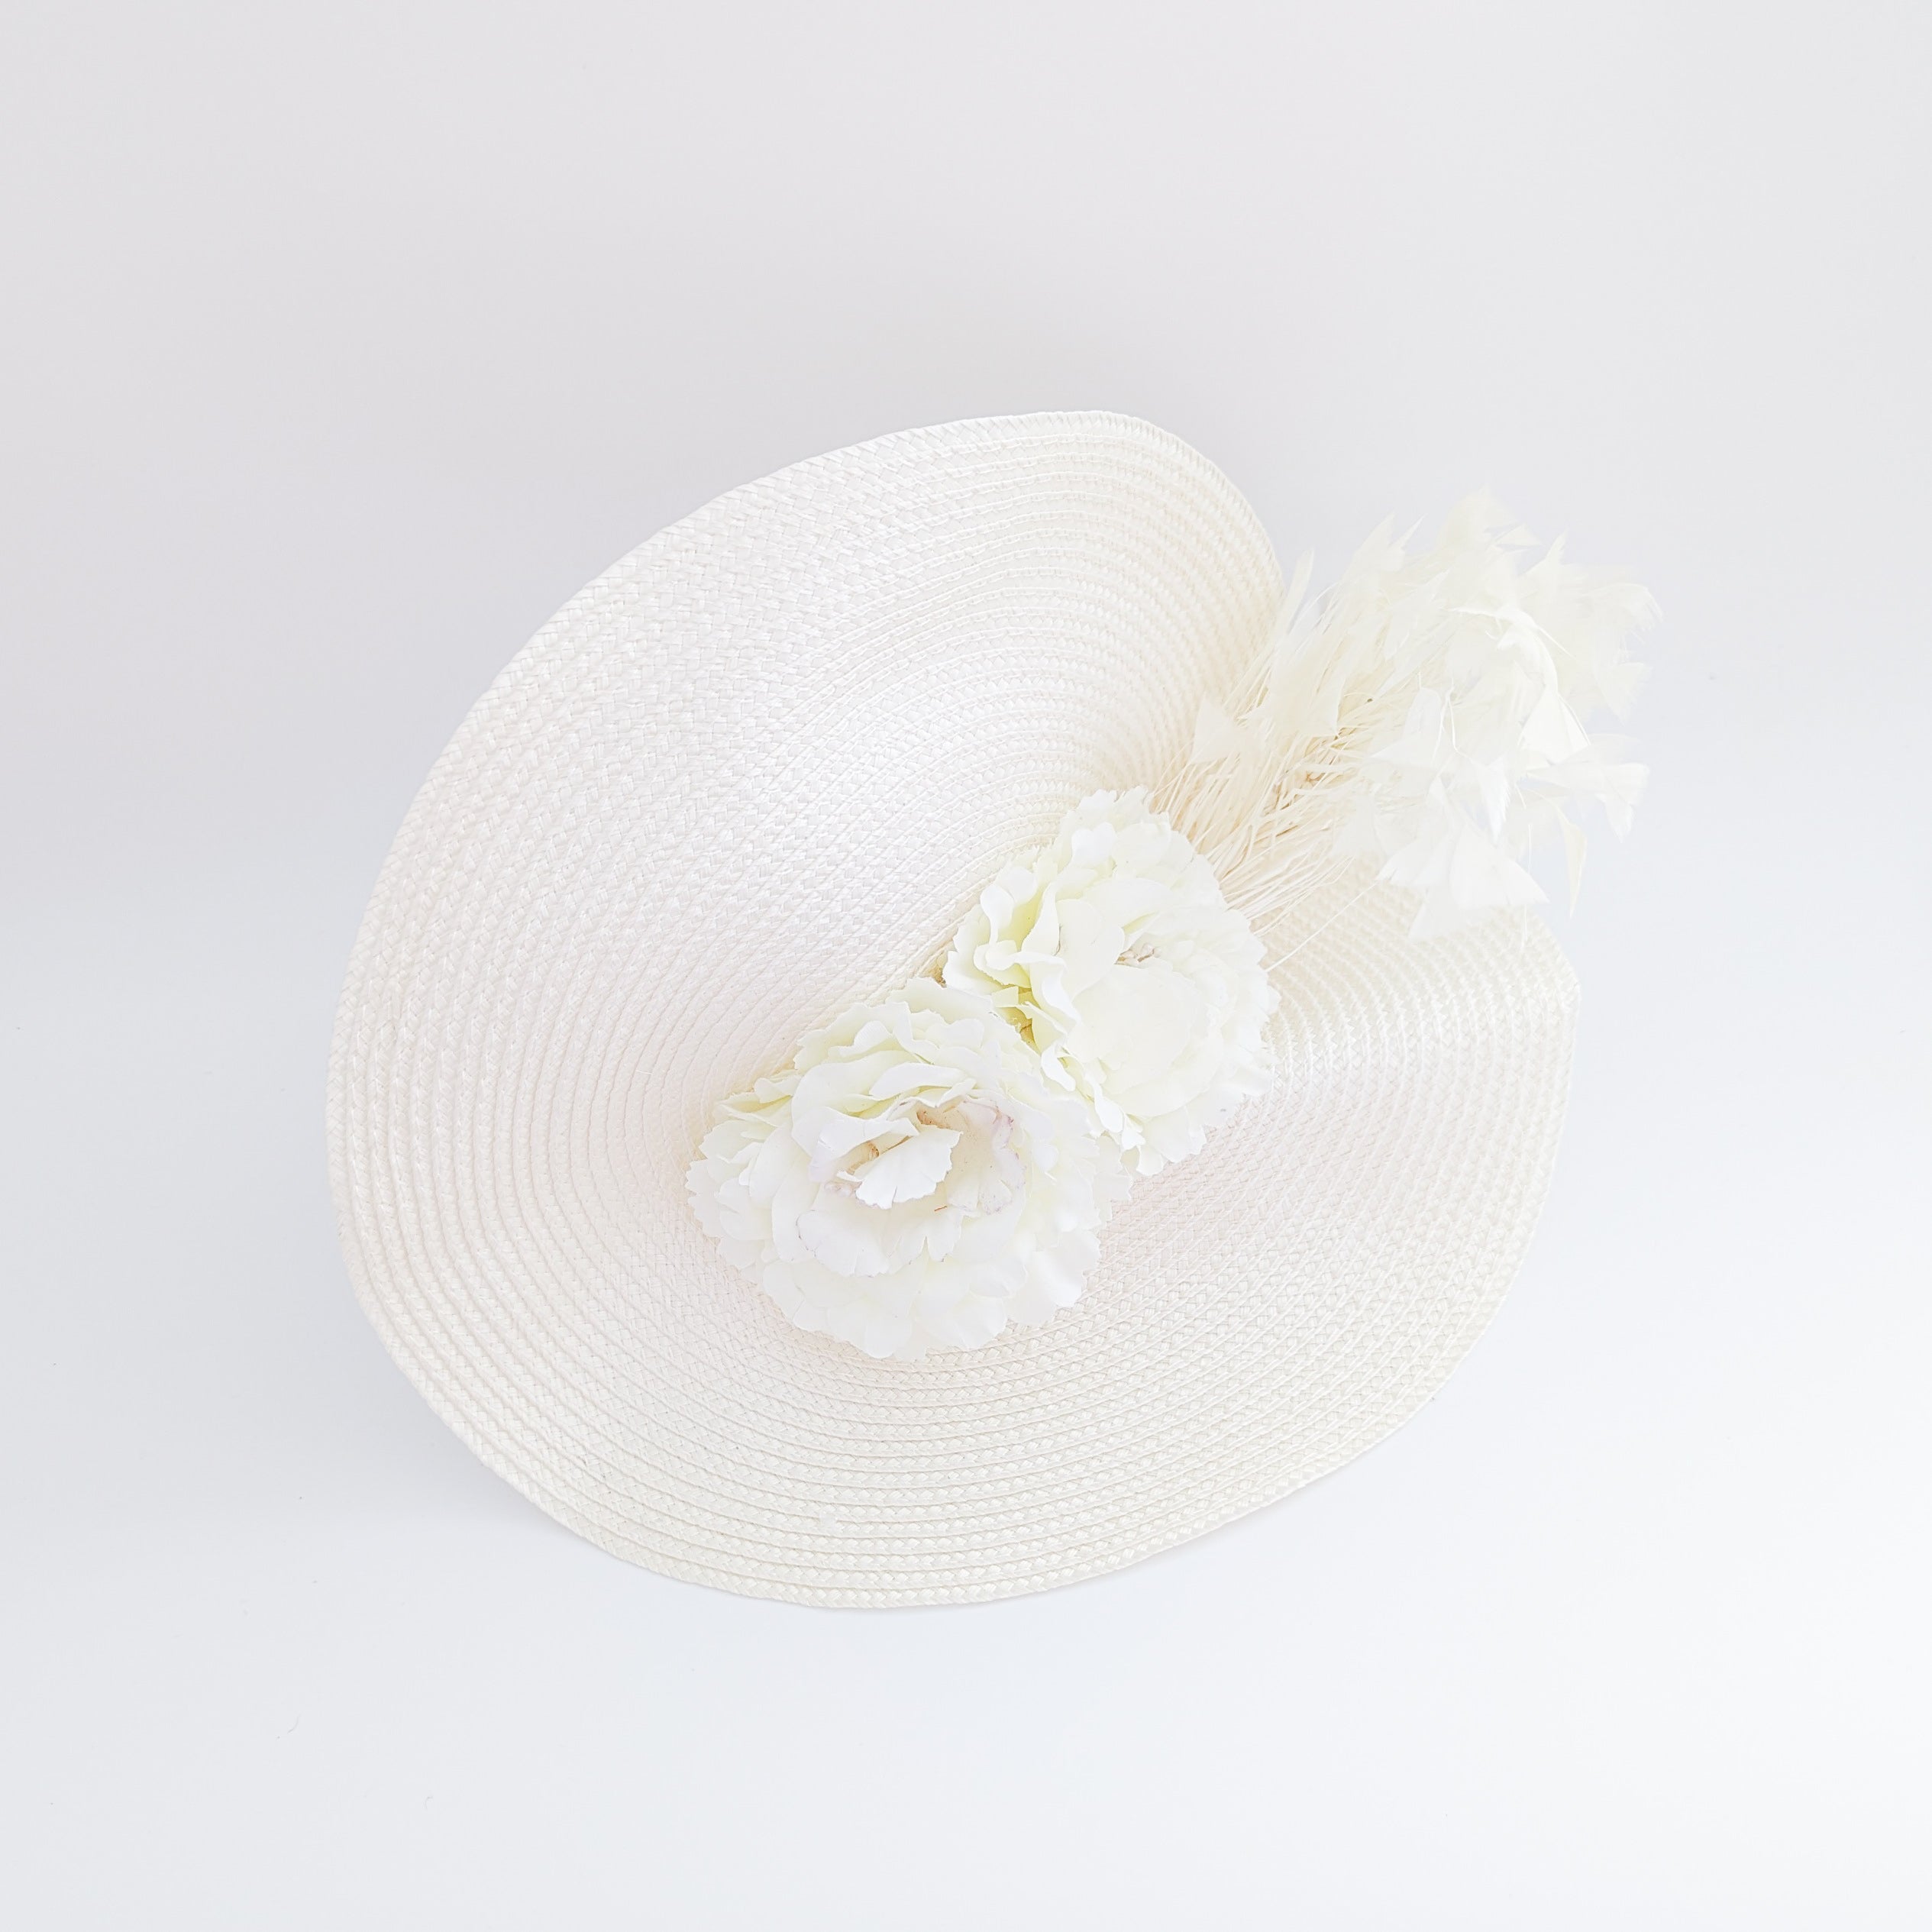 Cream large woven straw flower feather fascinator hat